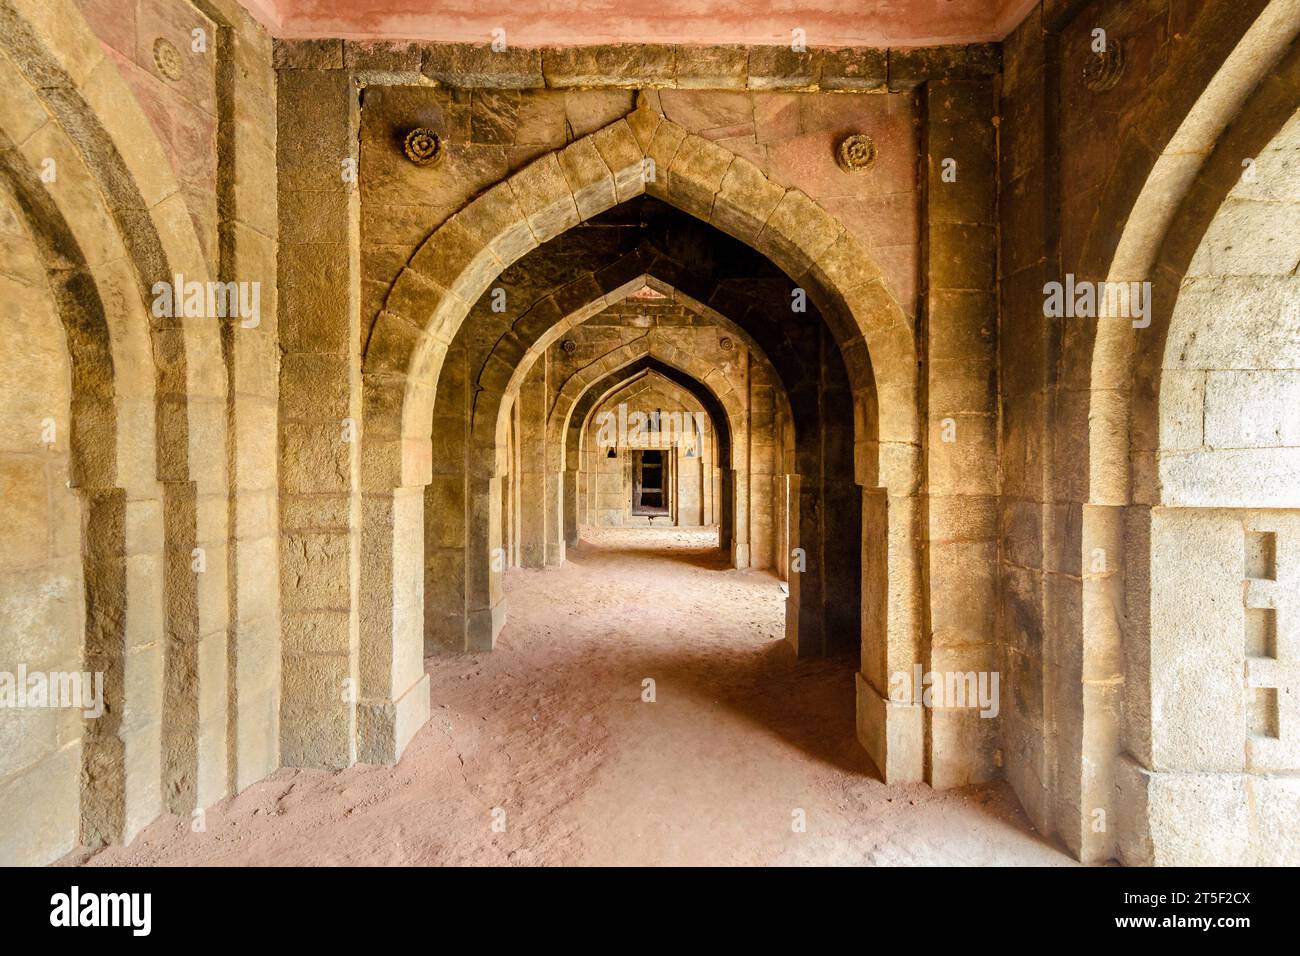 Open air hall room with vaulted roof and arched doors in Mughal style, around the tomb of Sikandar Lodi in the Lodhi Gardens, Delhi, India Stock Photo